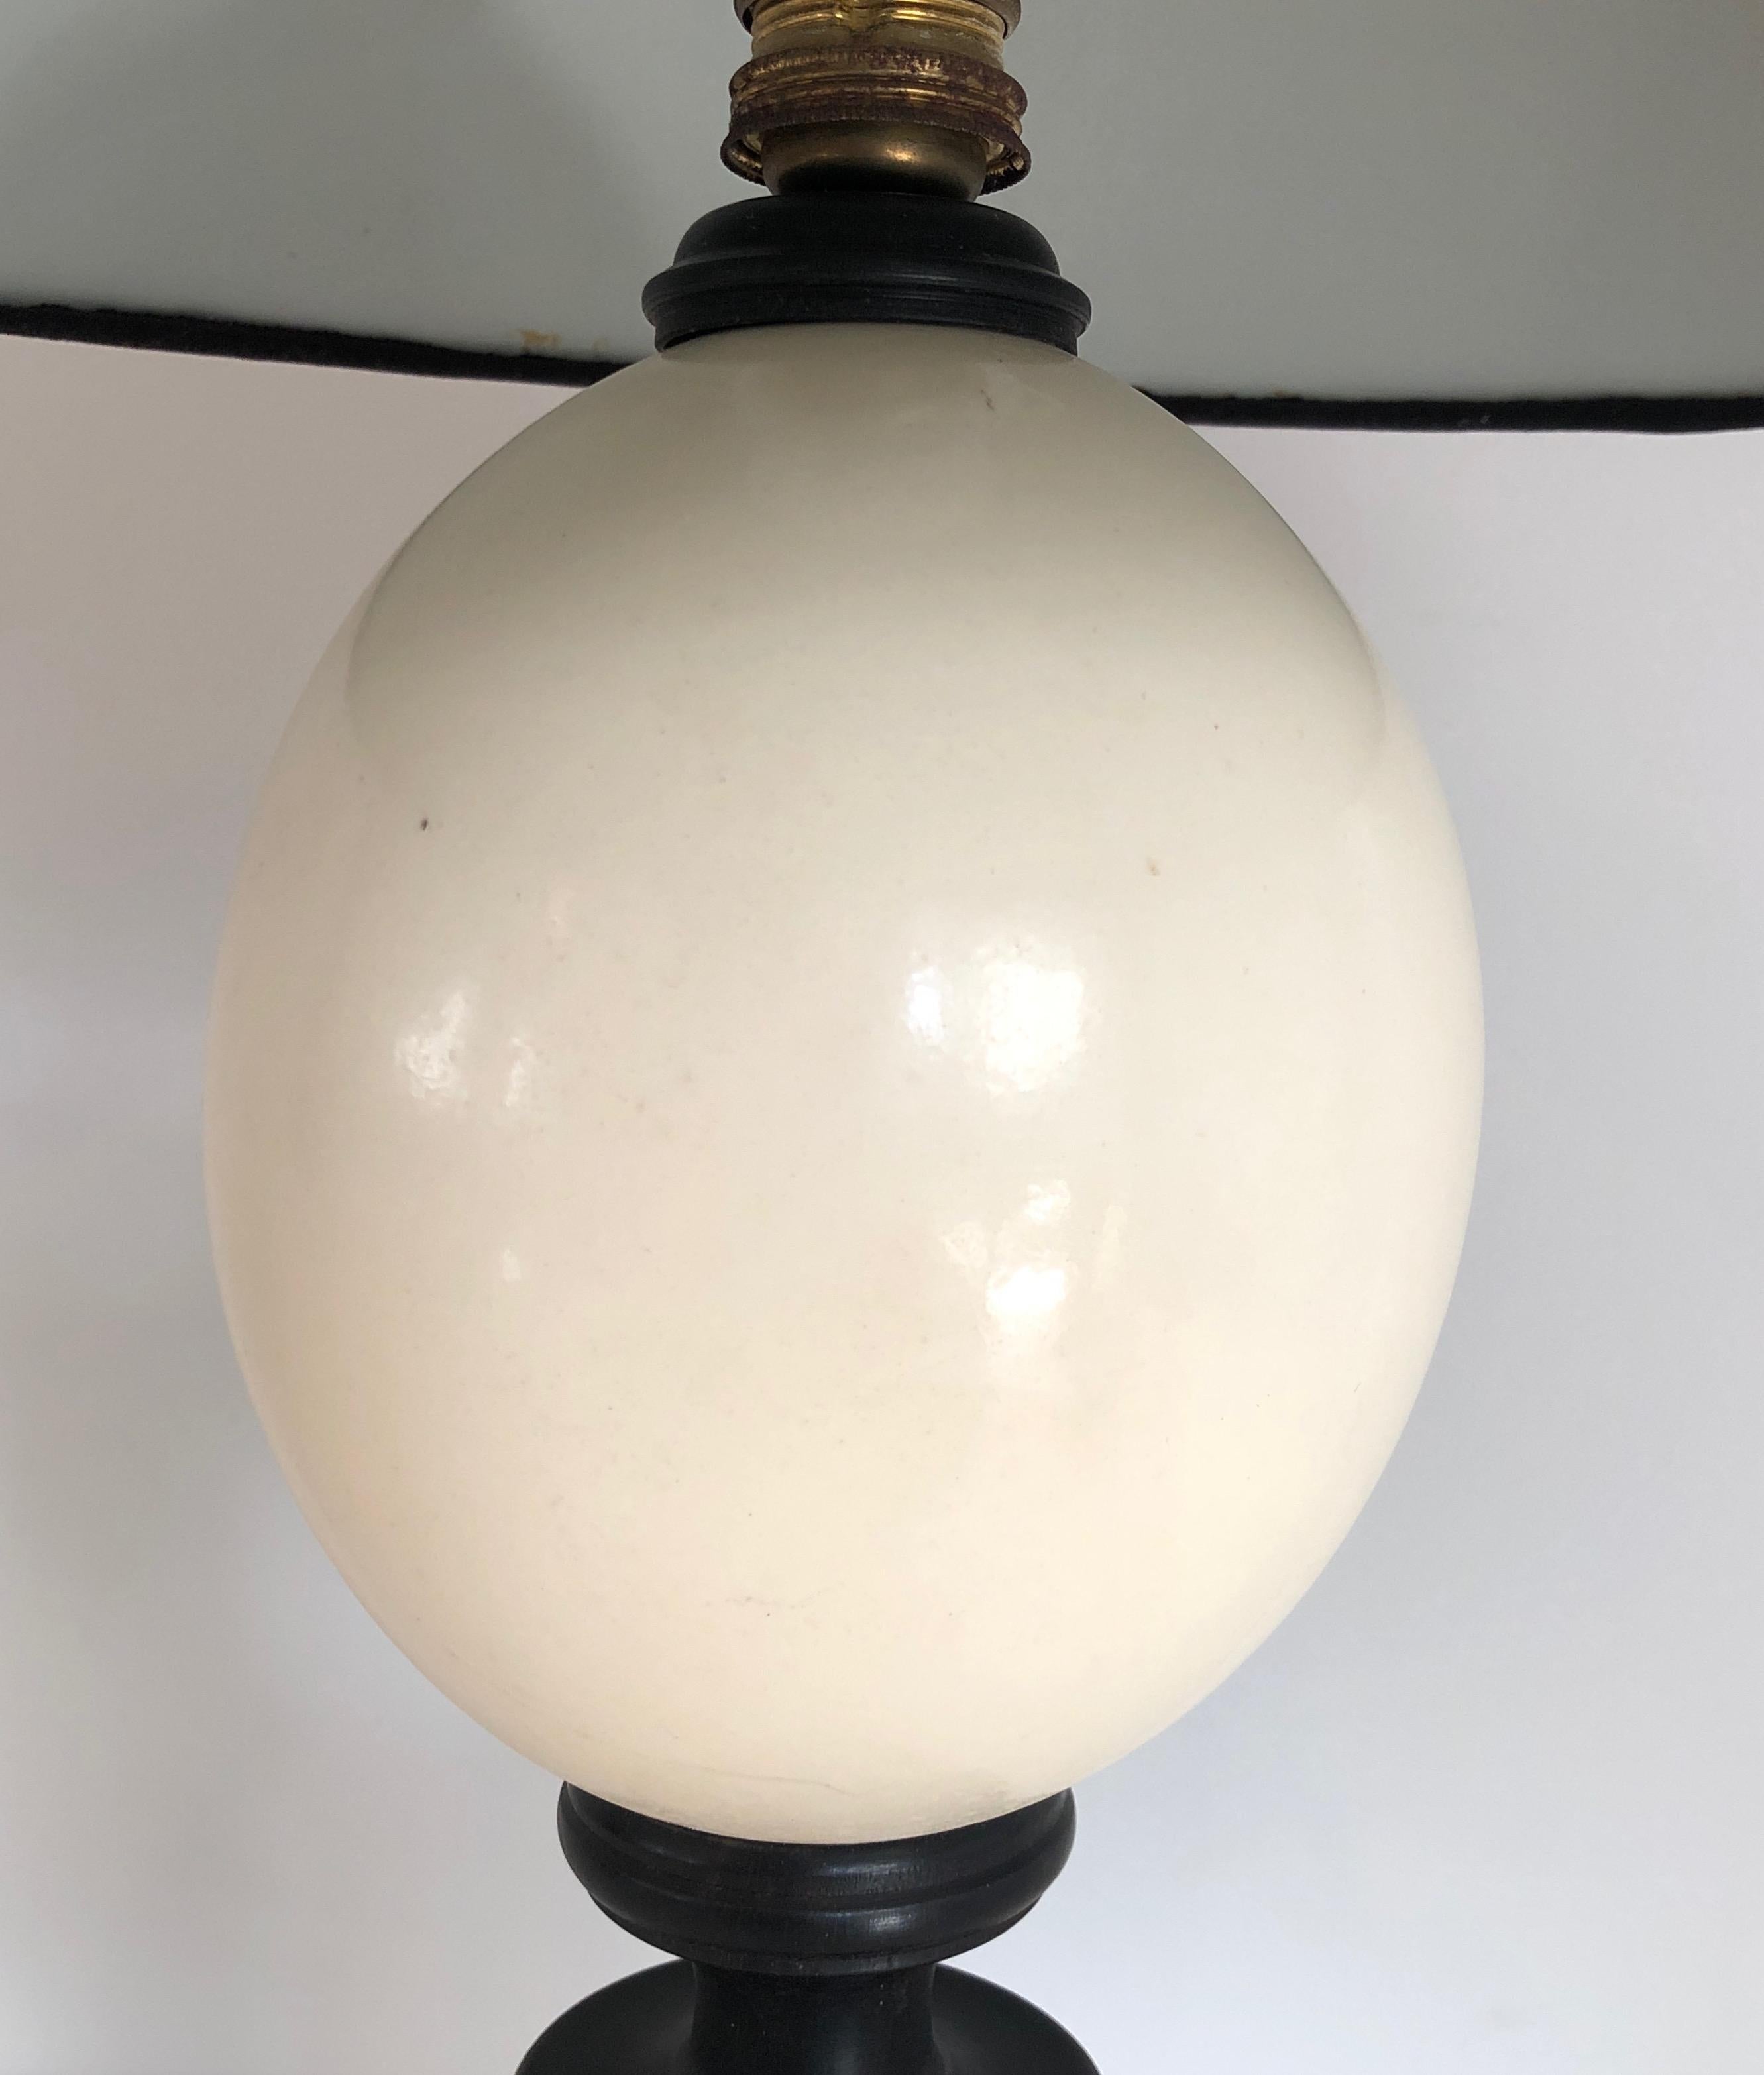 Blackened Wood and Ostrich Eggshell Table Lamp, French Work, Circa 1970 For Sale 1